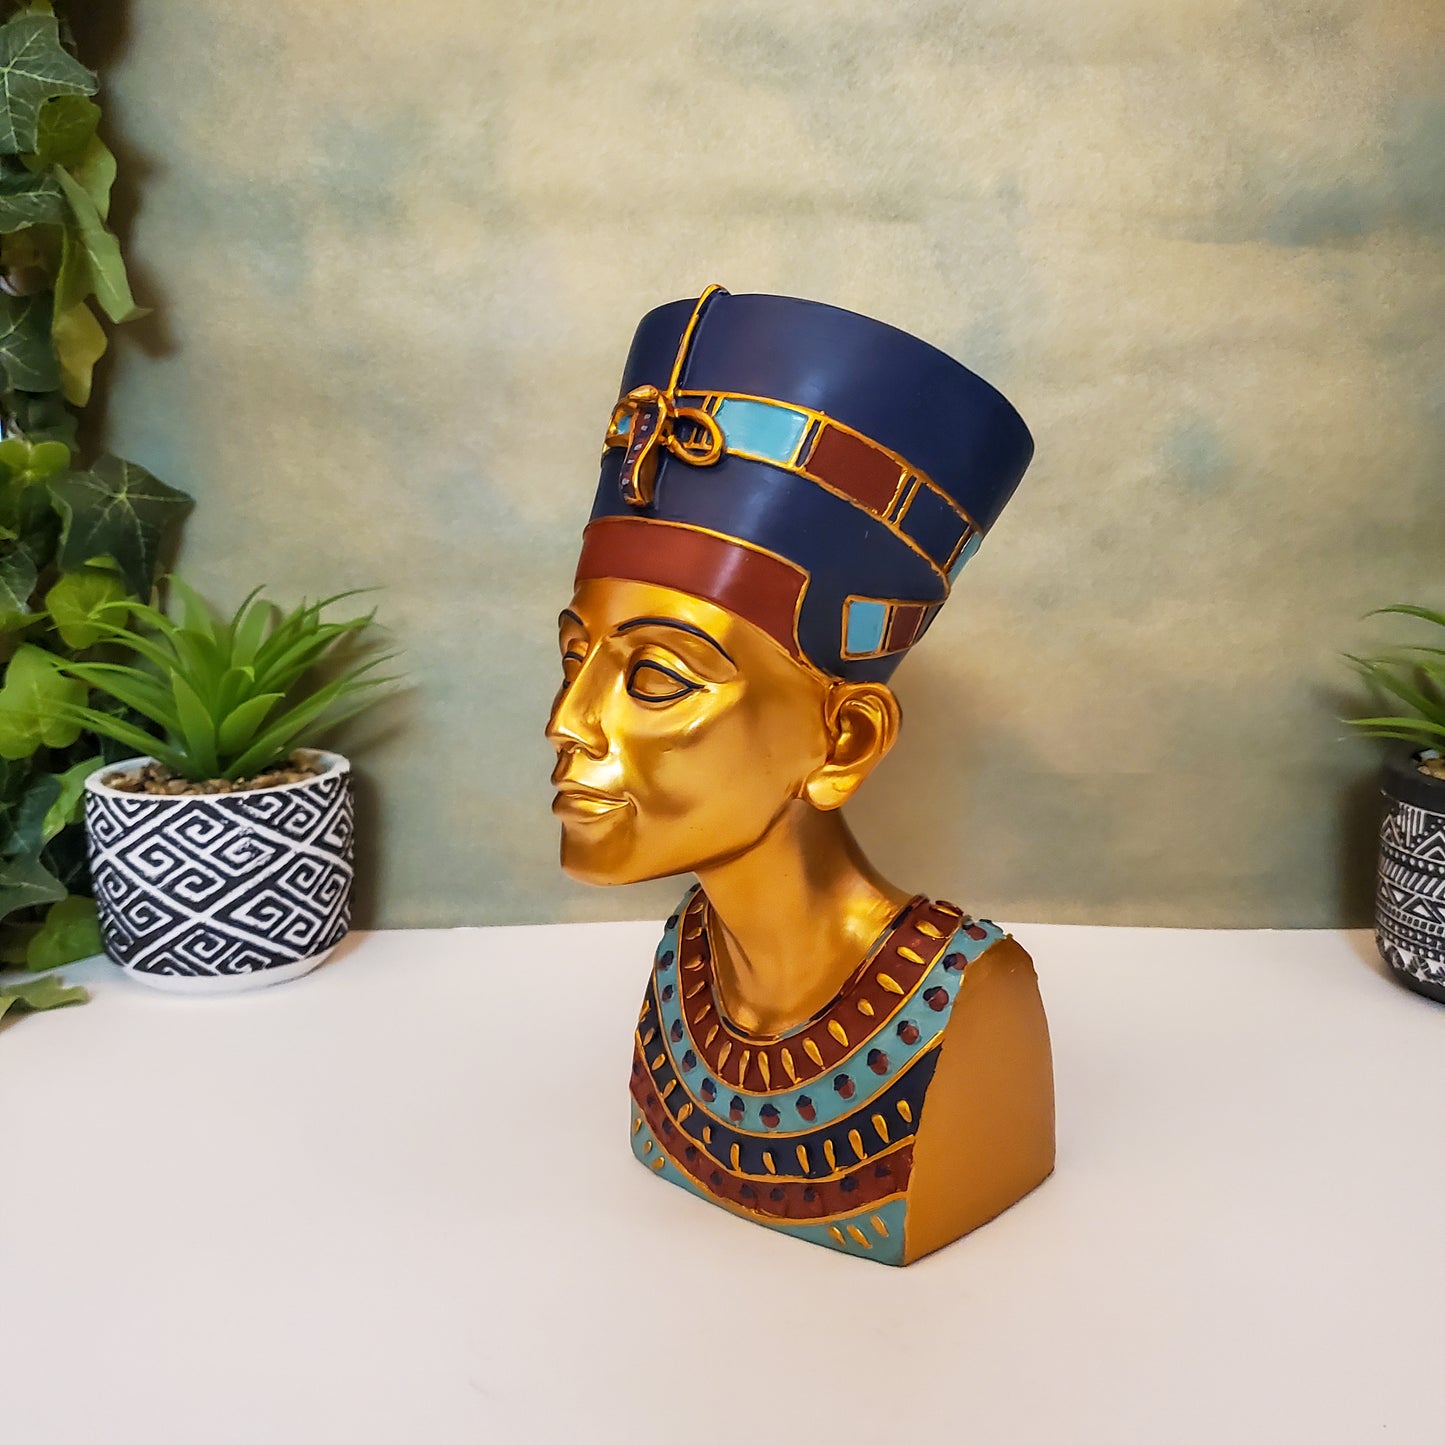 Vintage Large Egyptian Queen Nefertiti Bust Statue - 9.25" Height